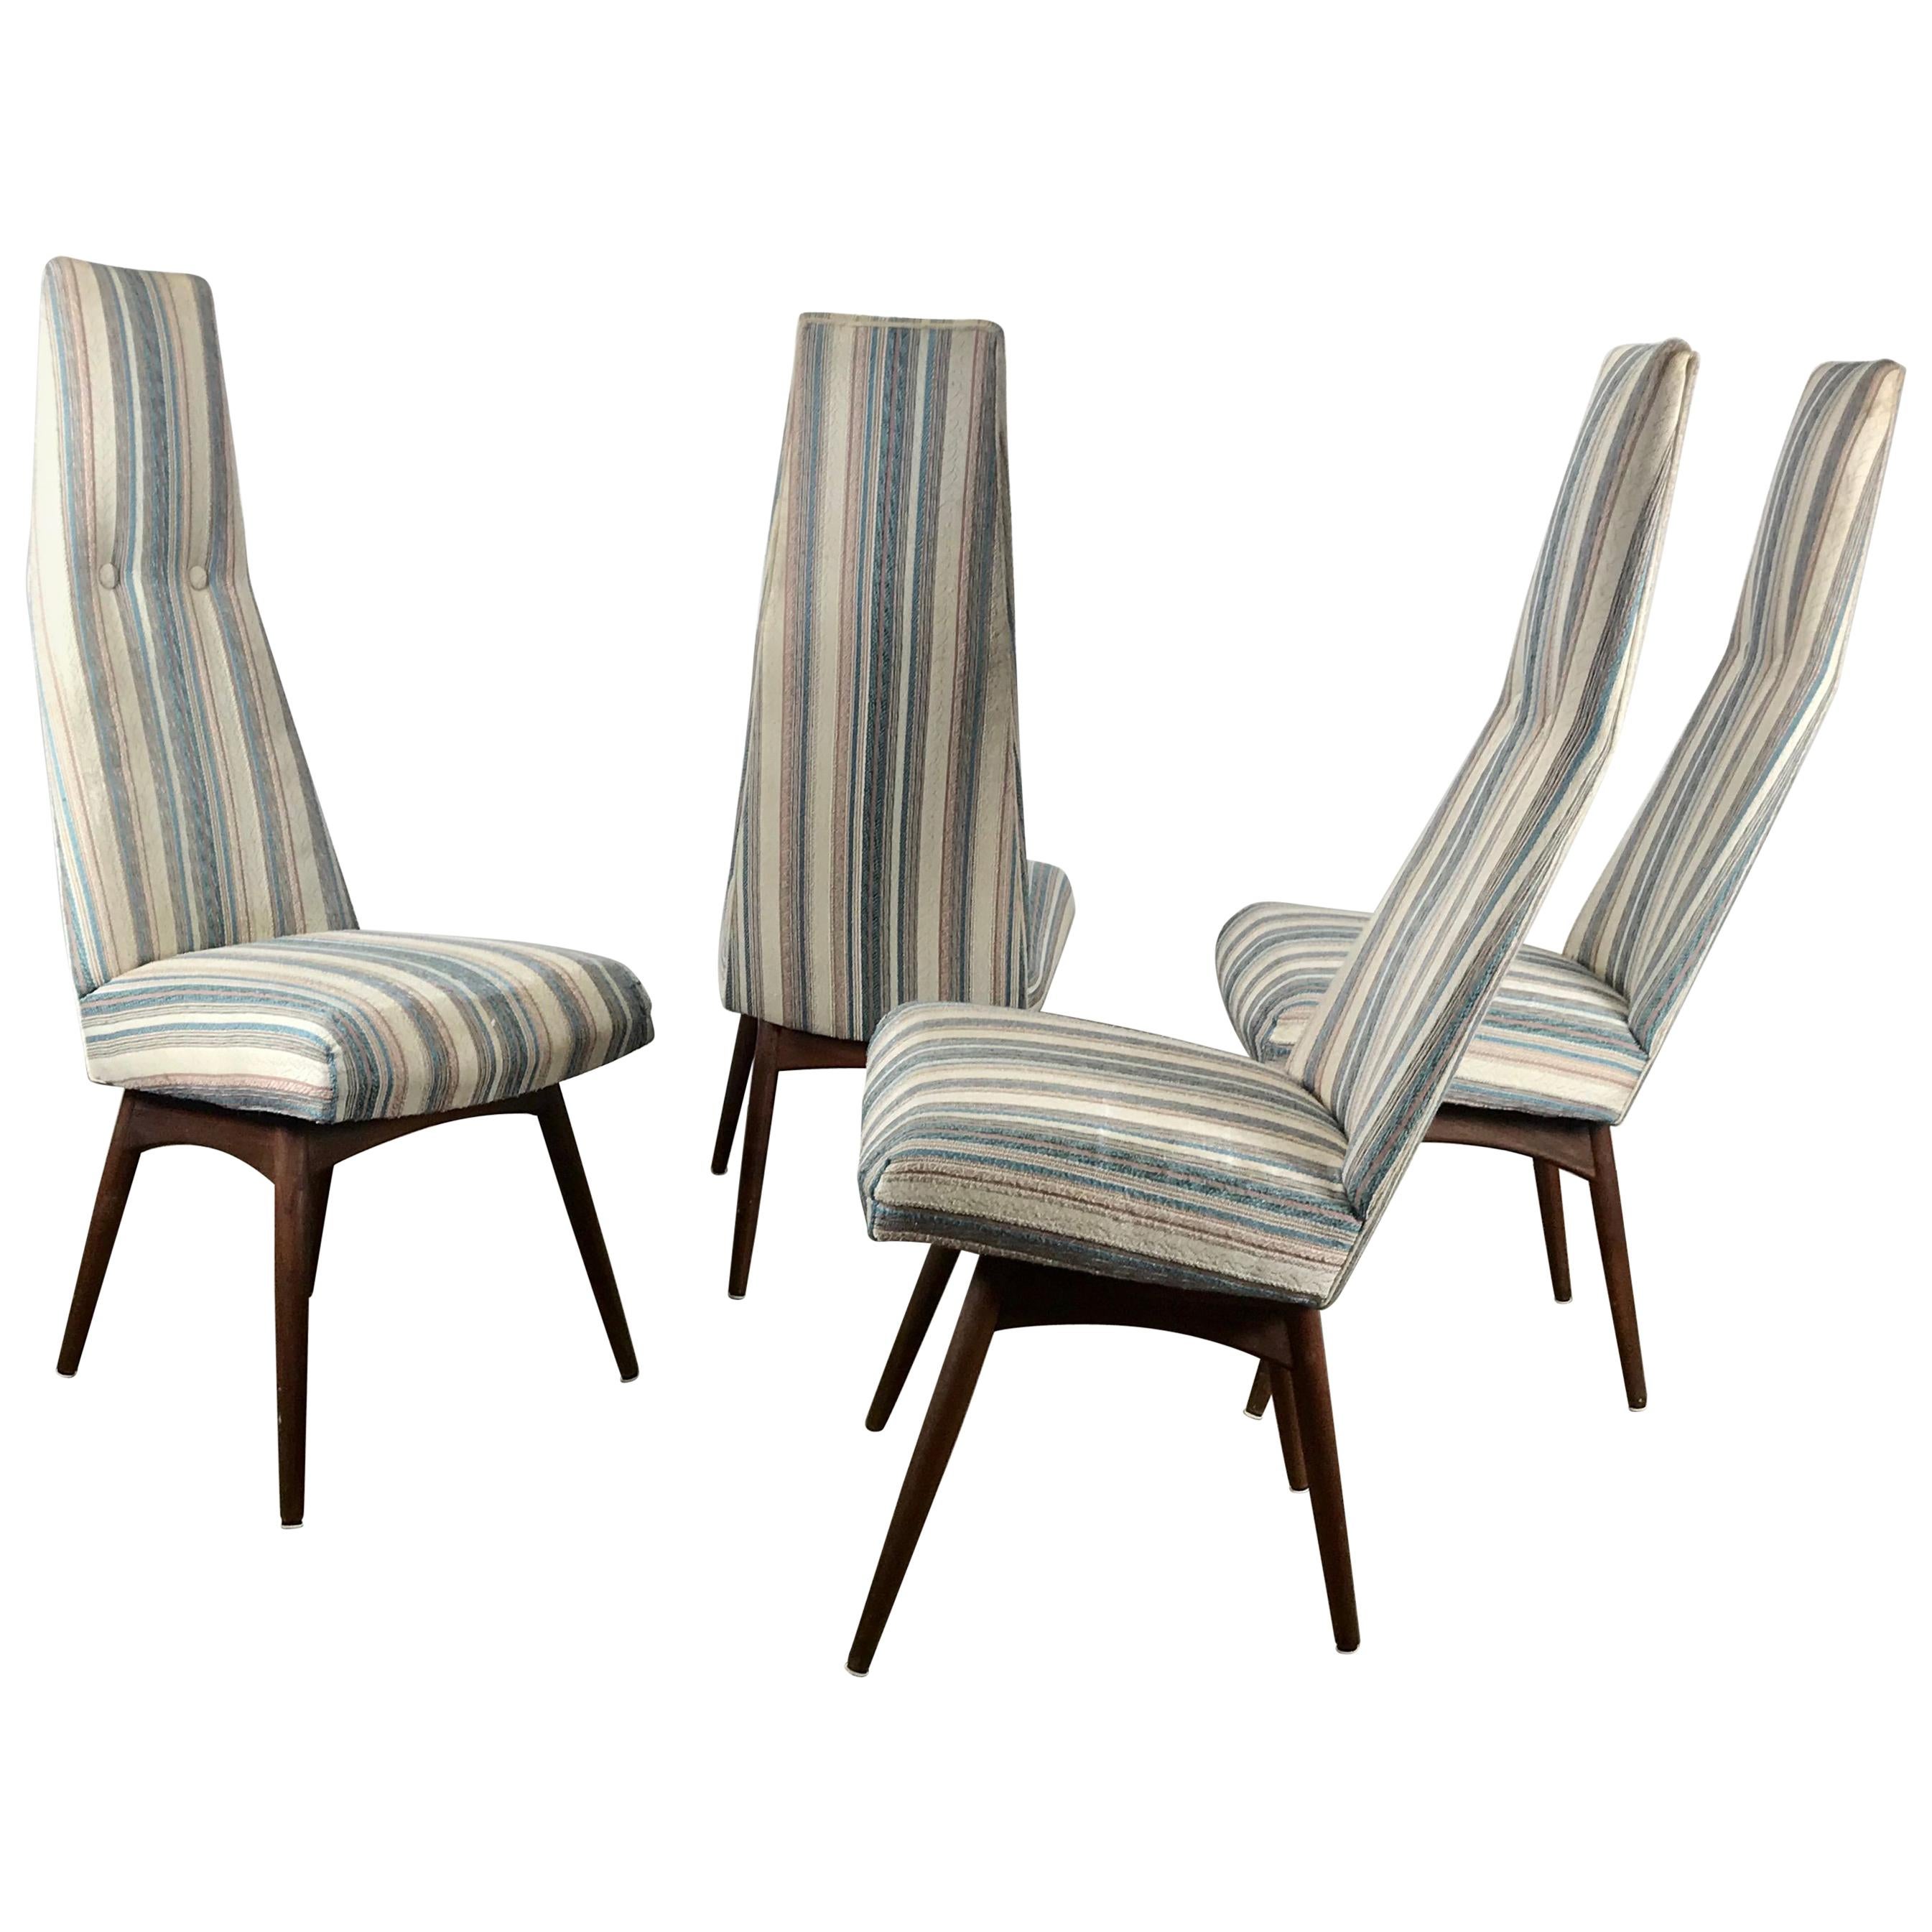 Set of 4 High Back Dining Chairs by Adrian Pearsall for Chromecraft